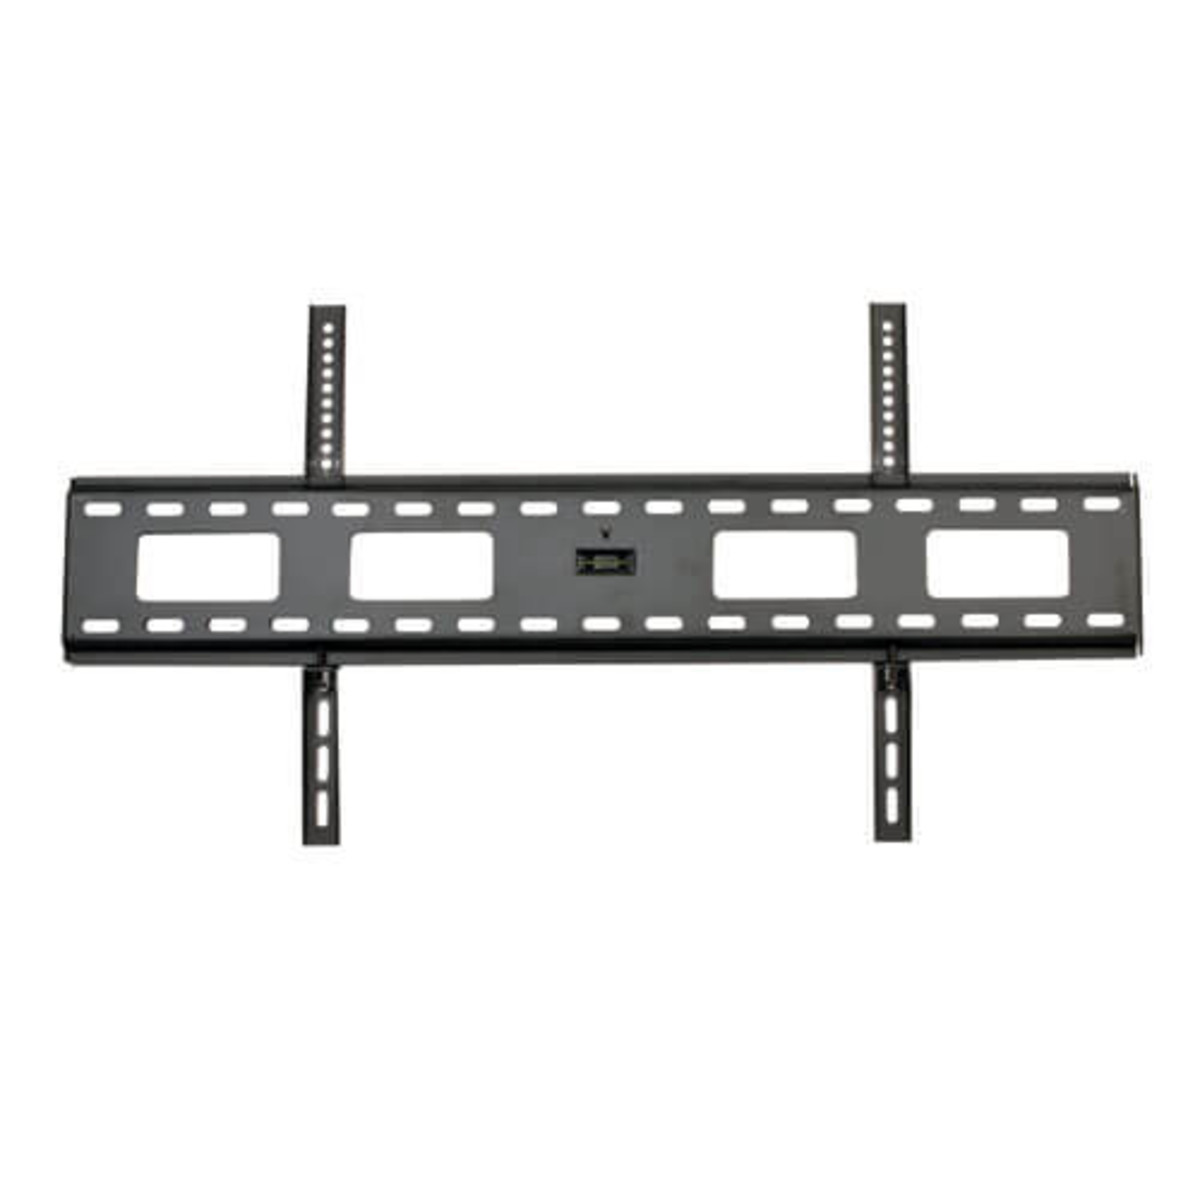 Fixed Wall Mount for 45 to 85